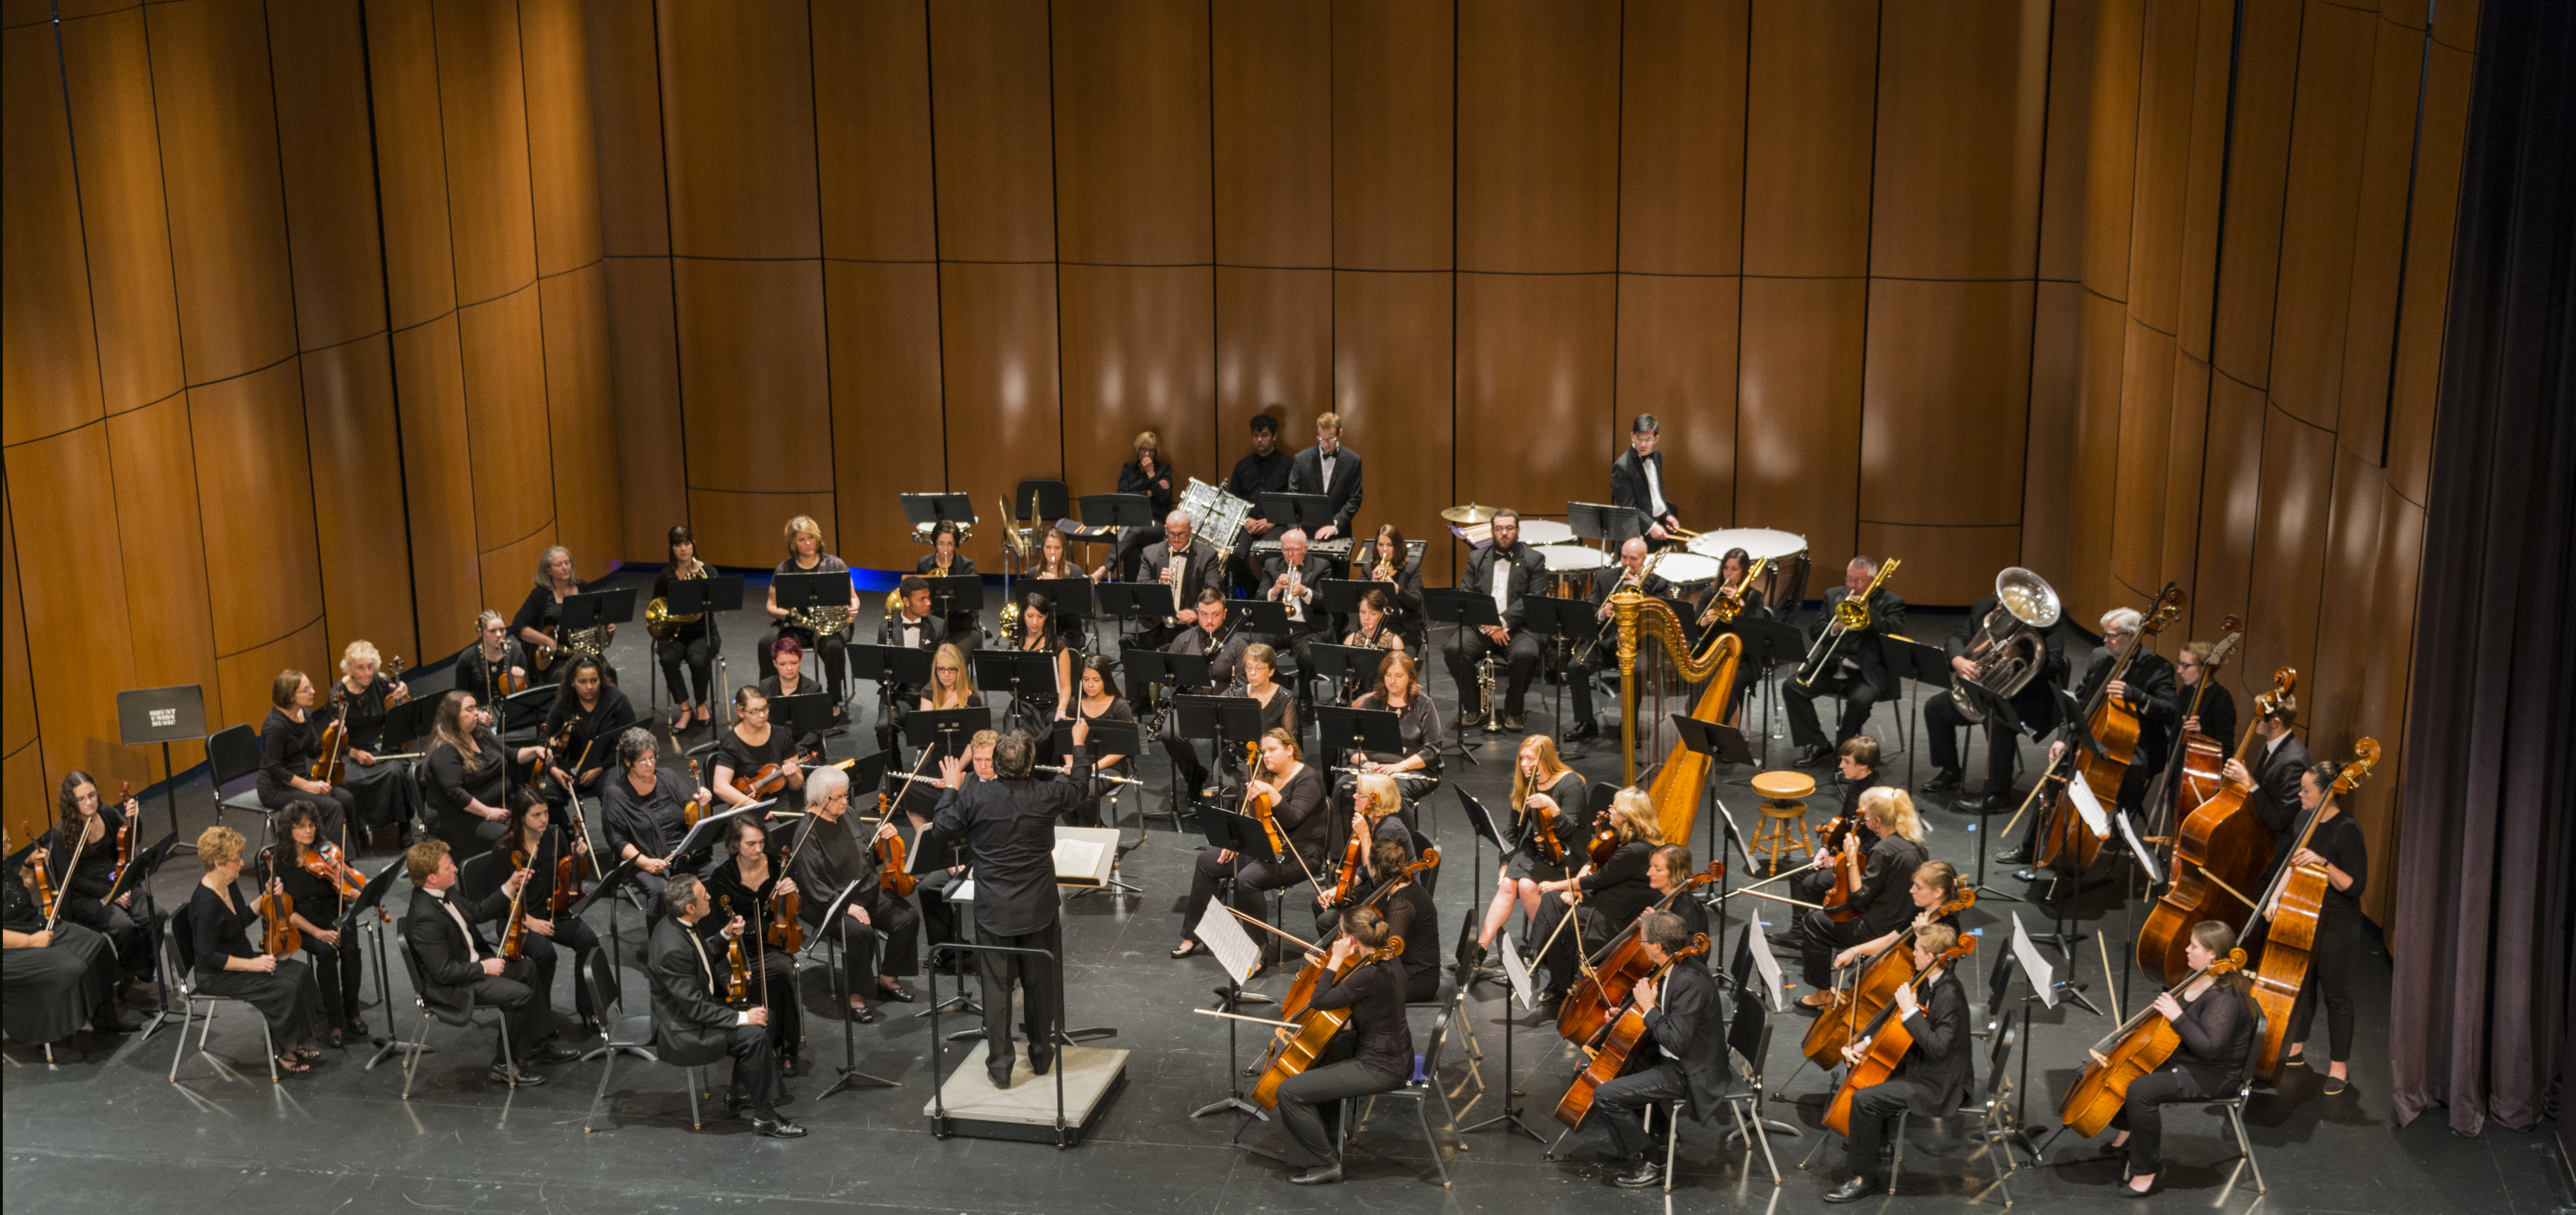 ASO orchestra on stage